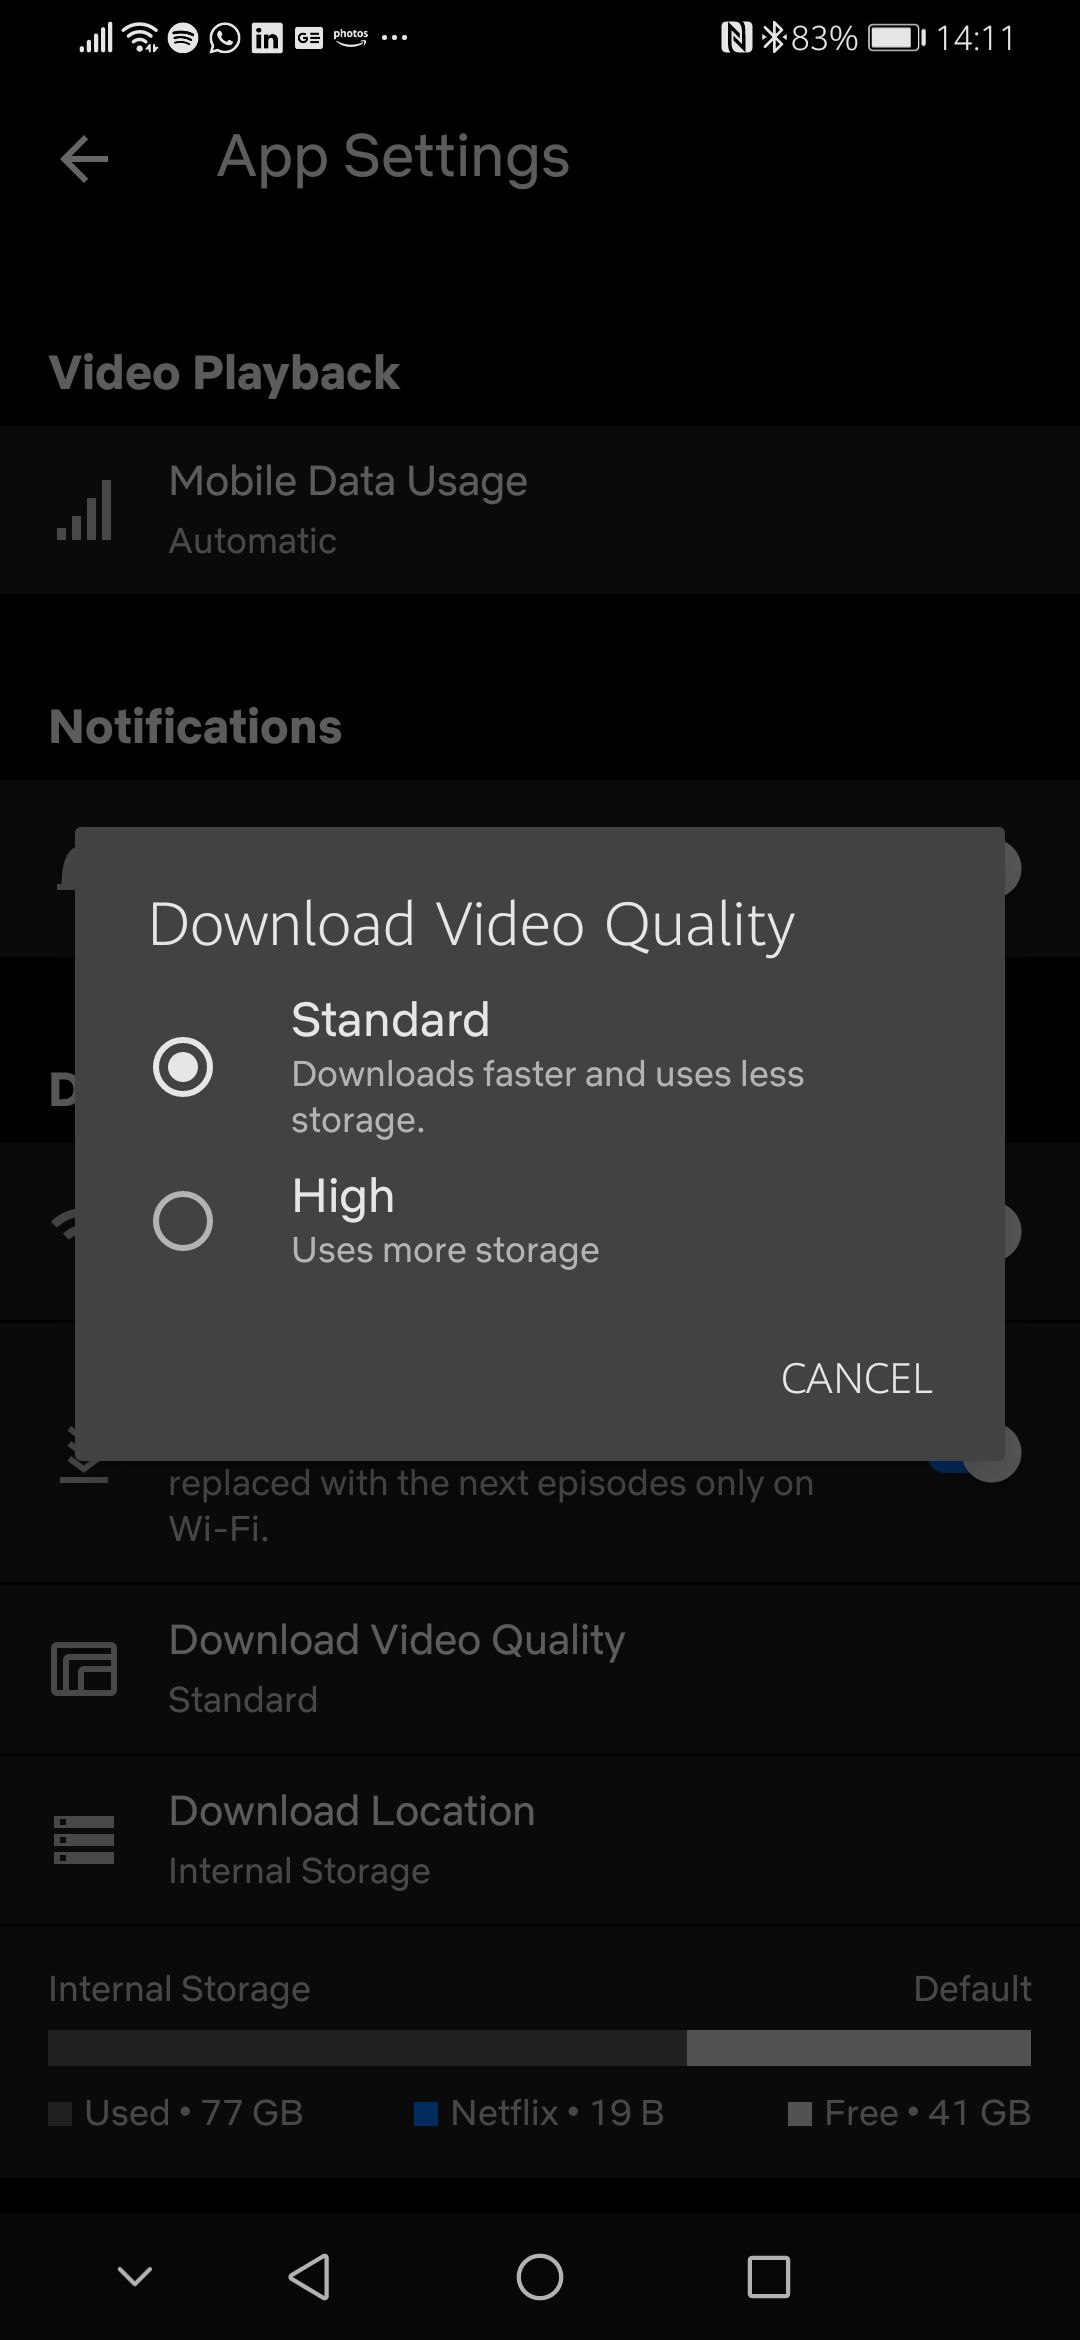 Netflix android app download video quality settings